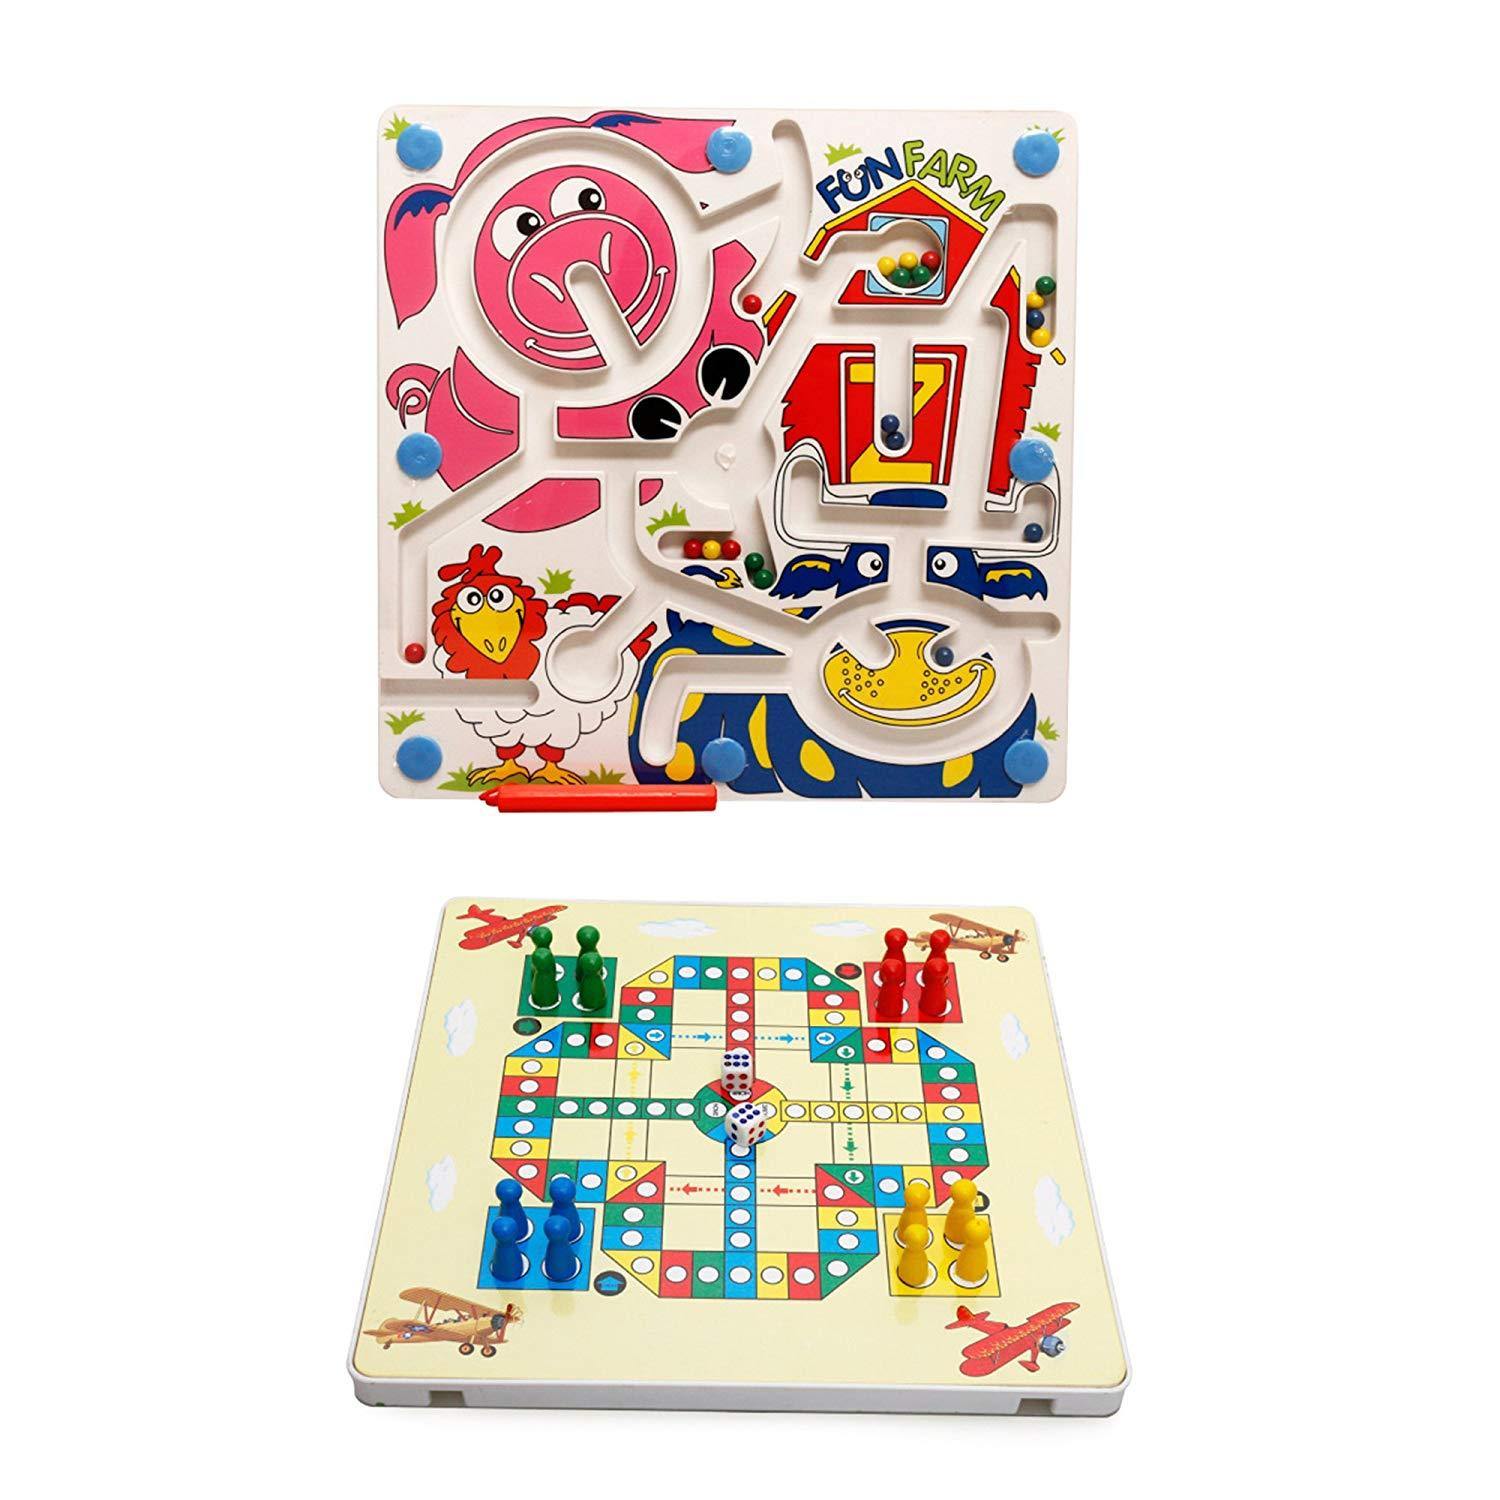 Bosonshop 2 In 1 Toddler Maze Puzzle Fun Farm +Flying Chess Board Game Balance Training Toys for Kids